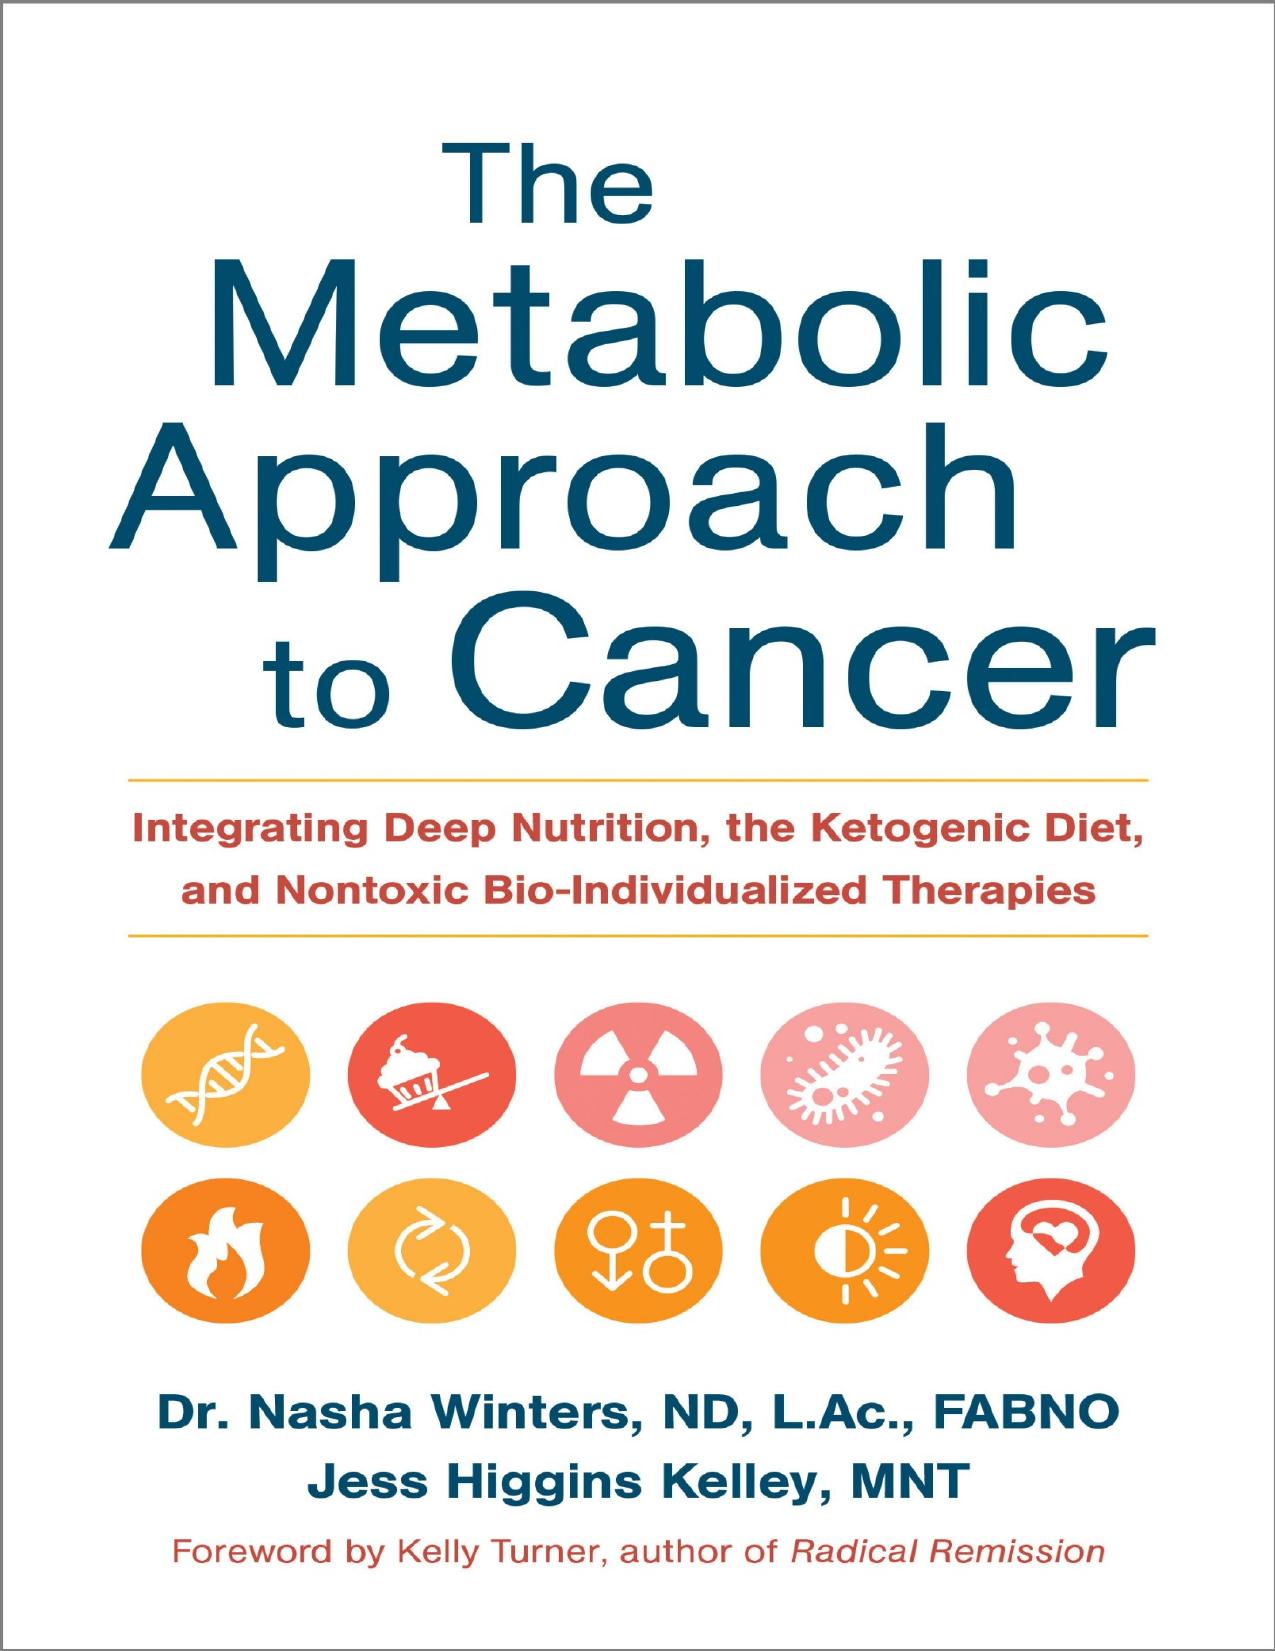 The Metabolic Approach to Cancer - PDFDrive.com